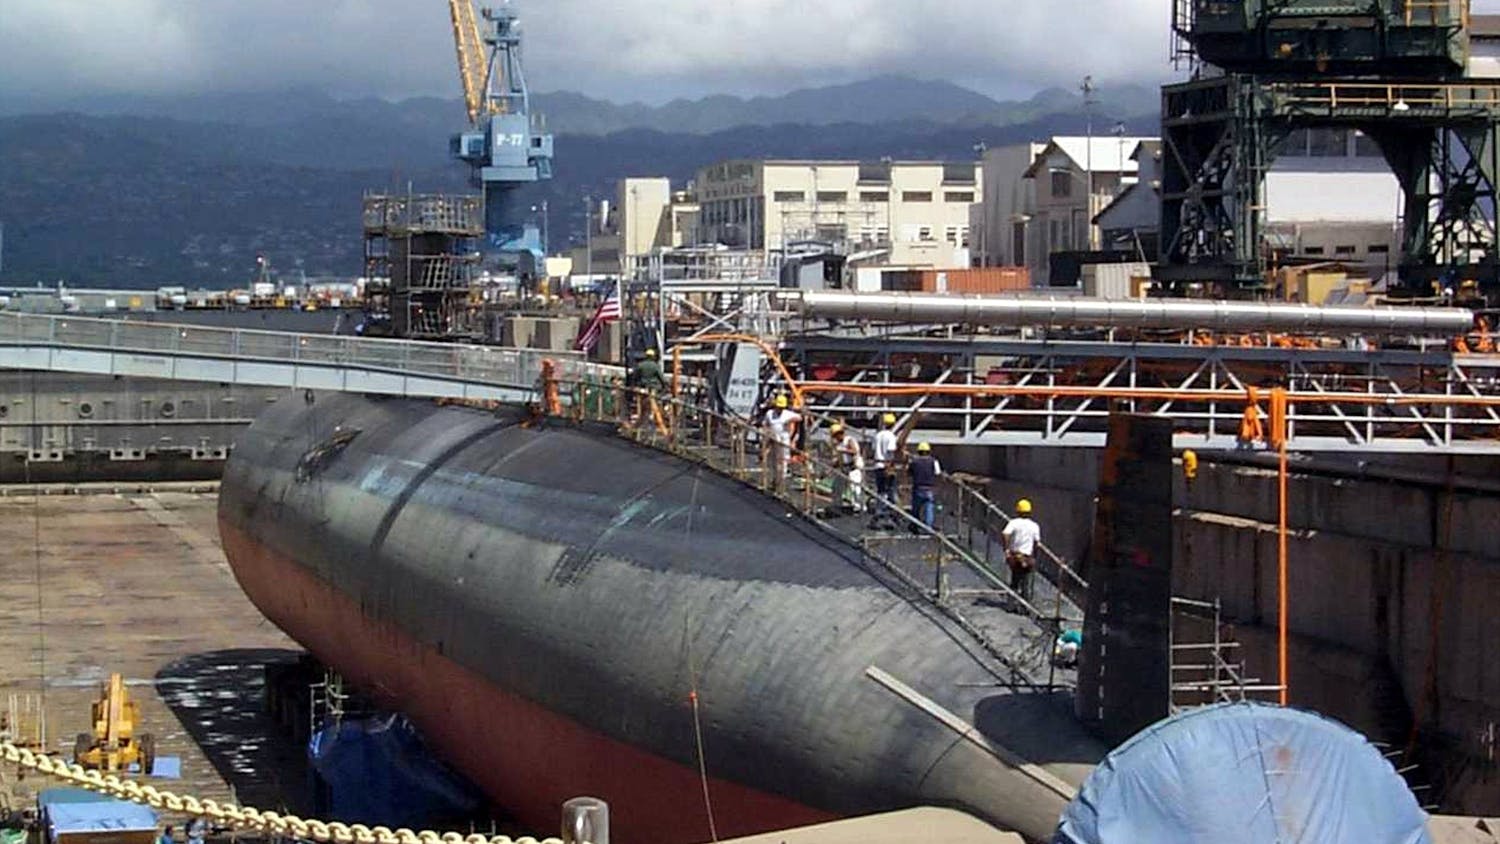 The USS Greeneville sits in dry dock at the Pearl Harbor Naval Shipyard on the island of Oahu, Hawaii.